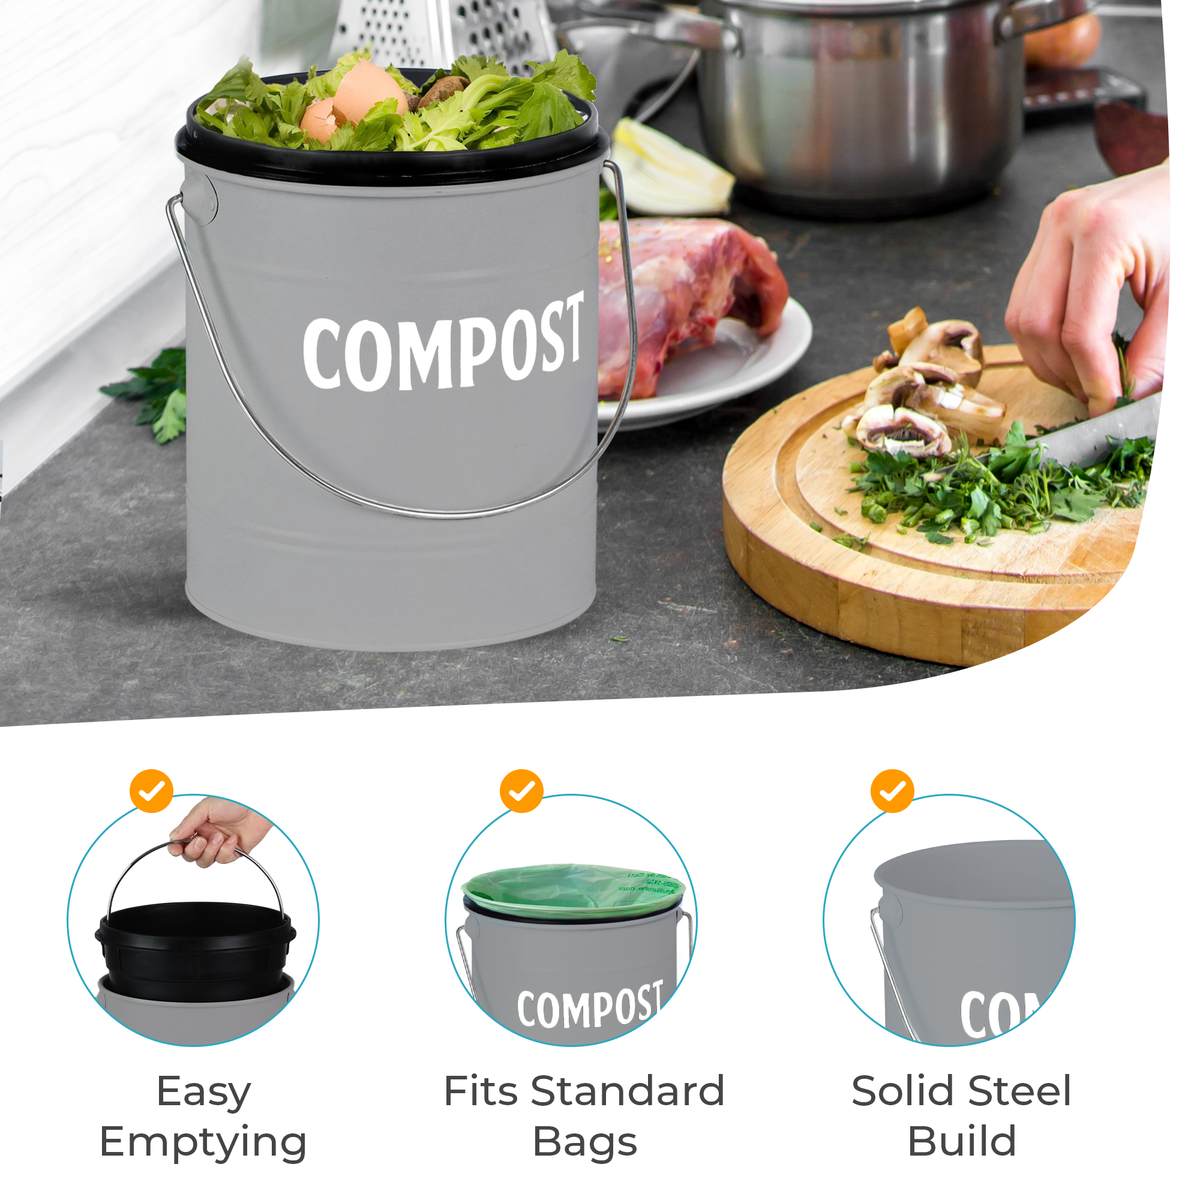 Features the usage of gray compost bin that can fit standard bags